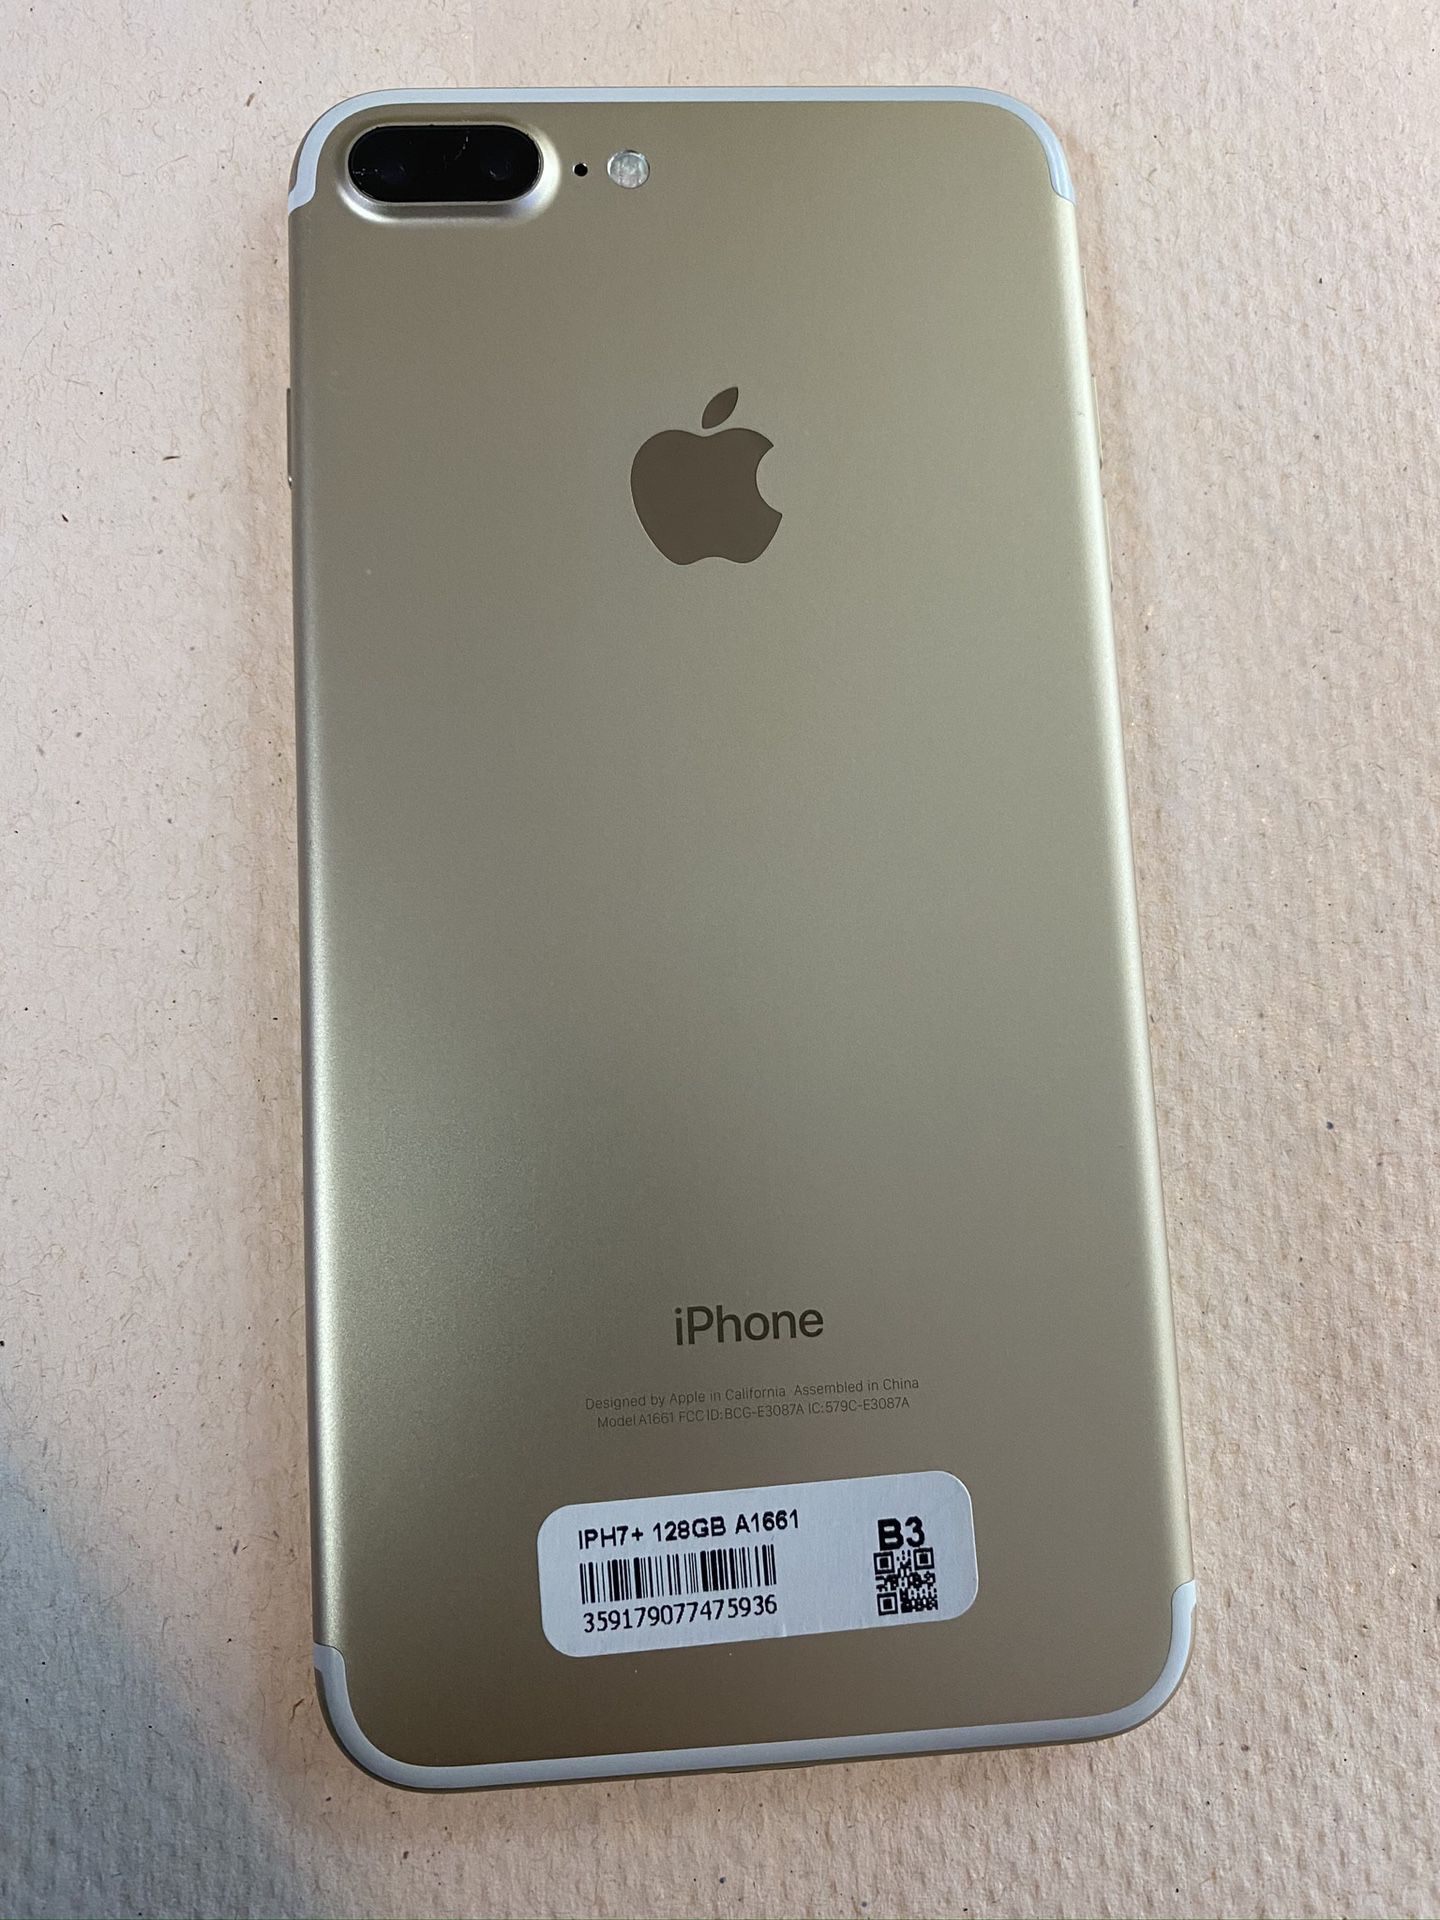 iphone 7+ 128 go factory unlocked mint condition gold.